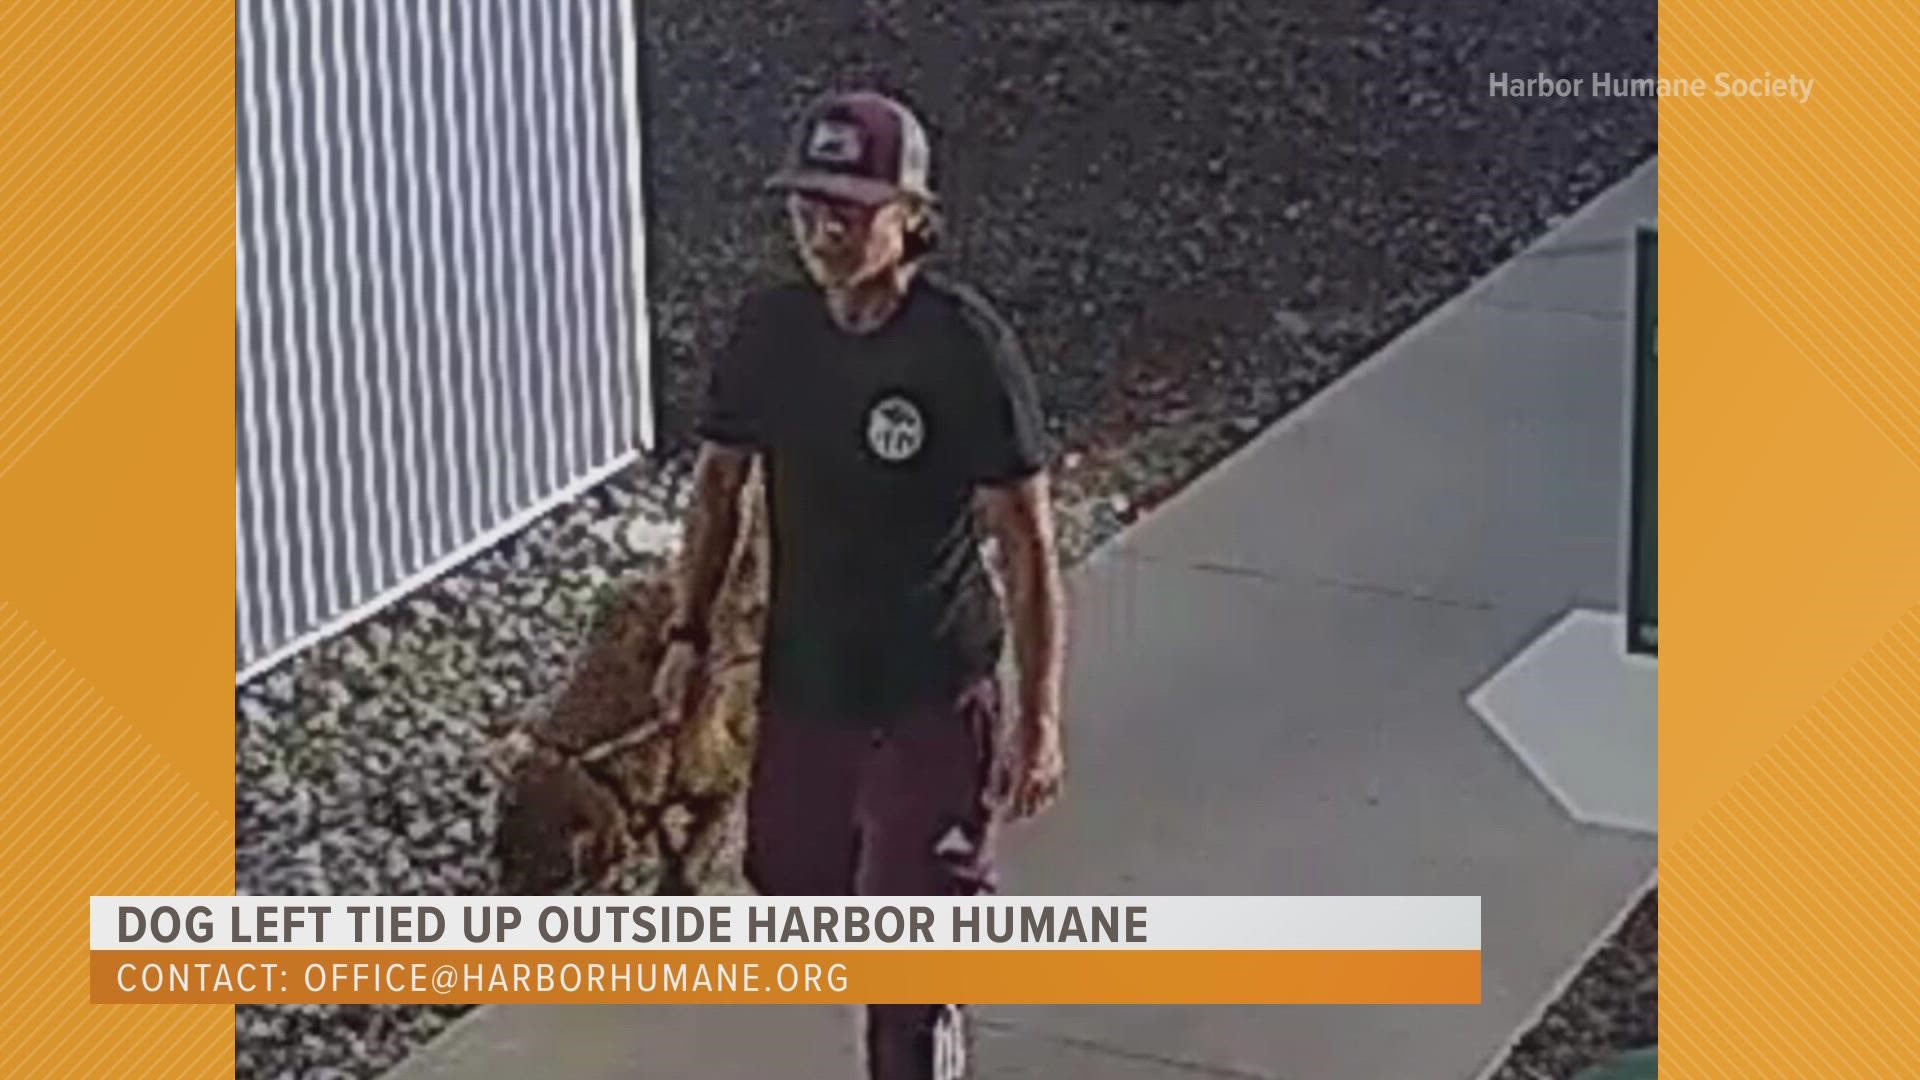 Harbor Humane Society is looking for the person they caught on surveillance cameras tying up a dog and leaving it outside their building Friday night.